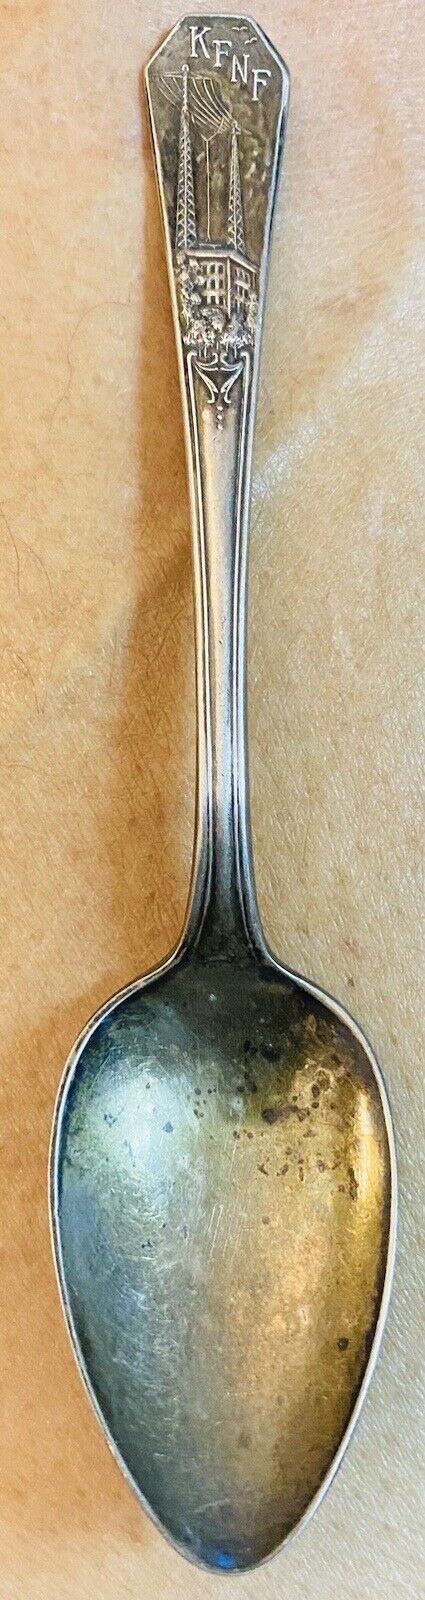 ANTIQUE KFNF Radio Station Henry Field Seed Co ADVERTISING SOUVENIR SPOON RARE